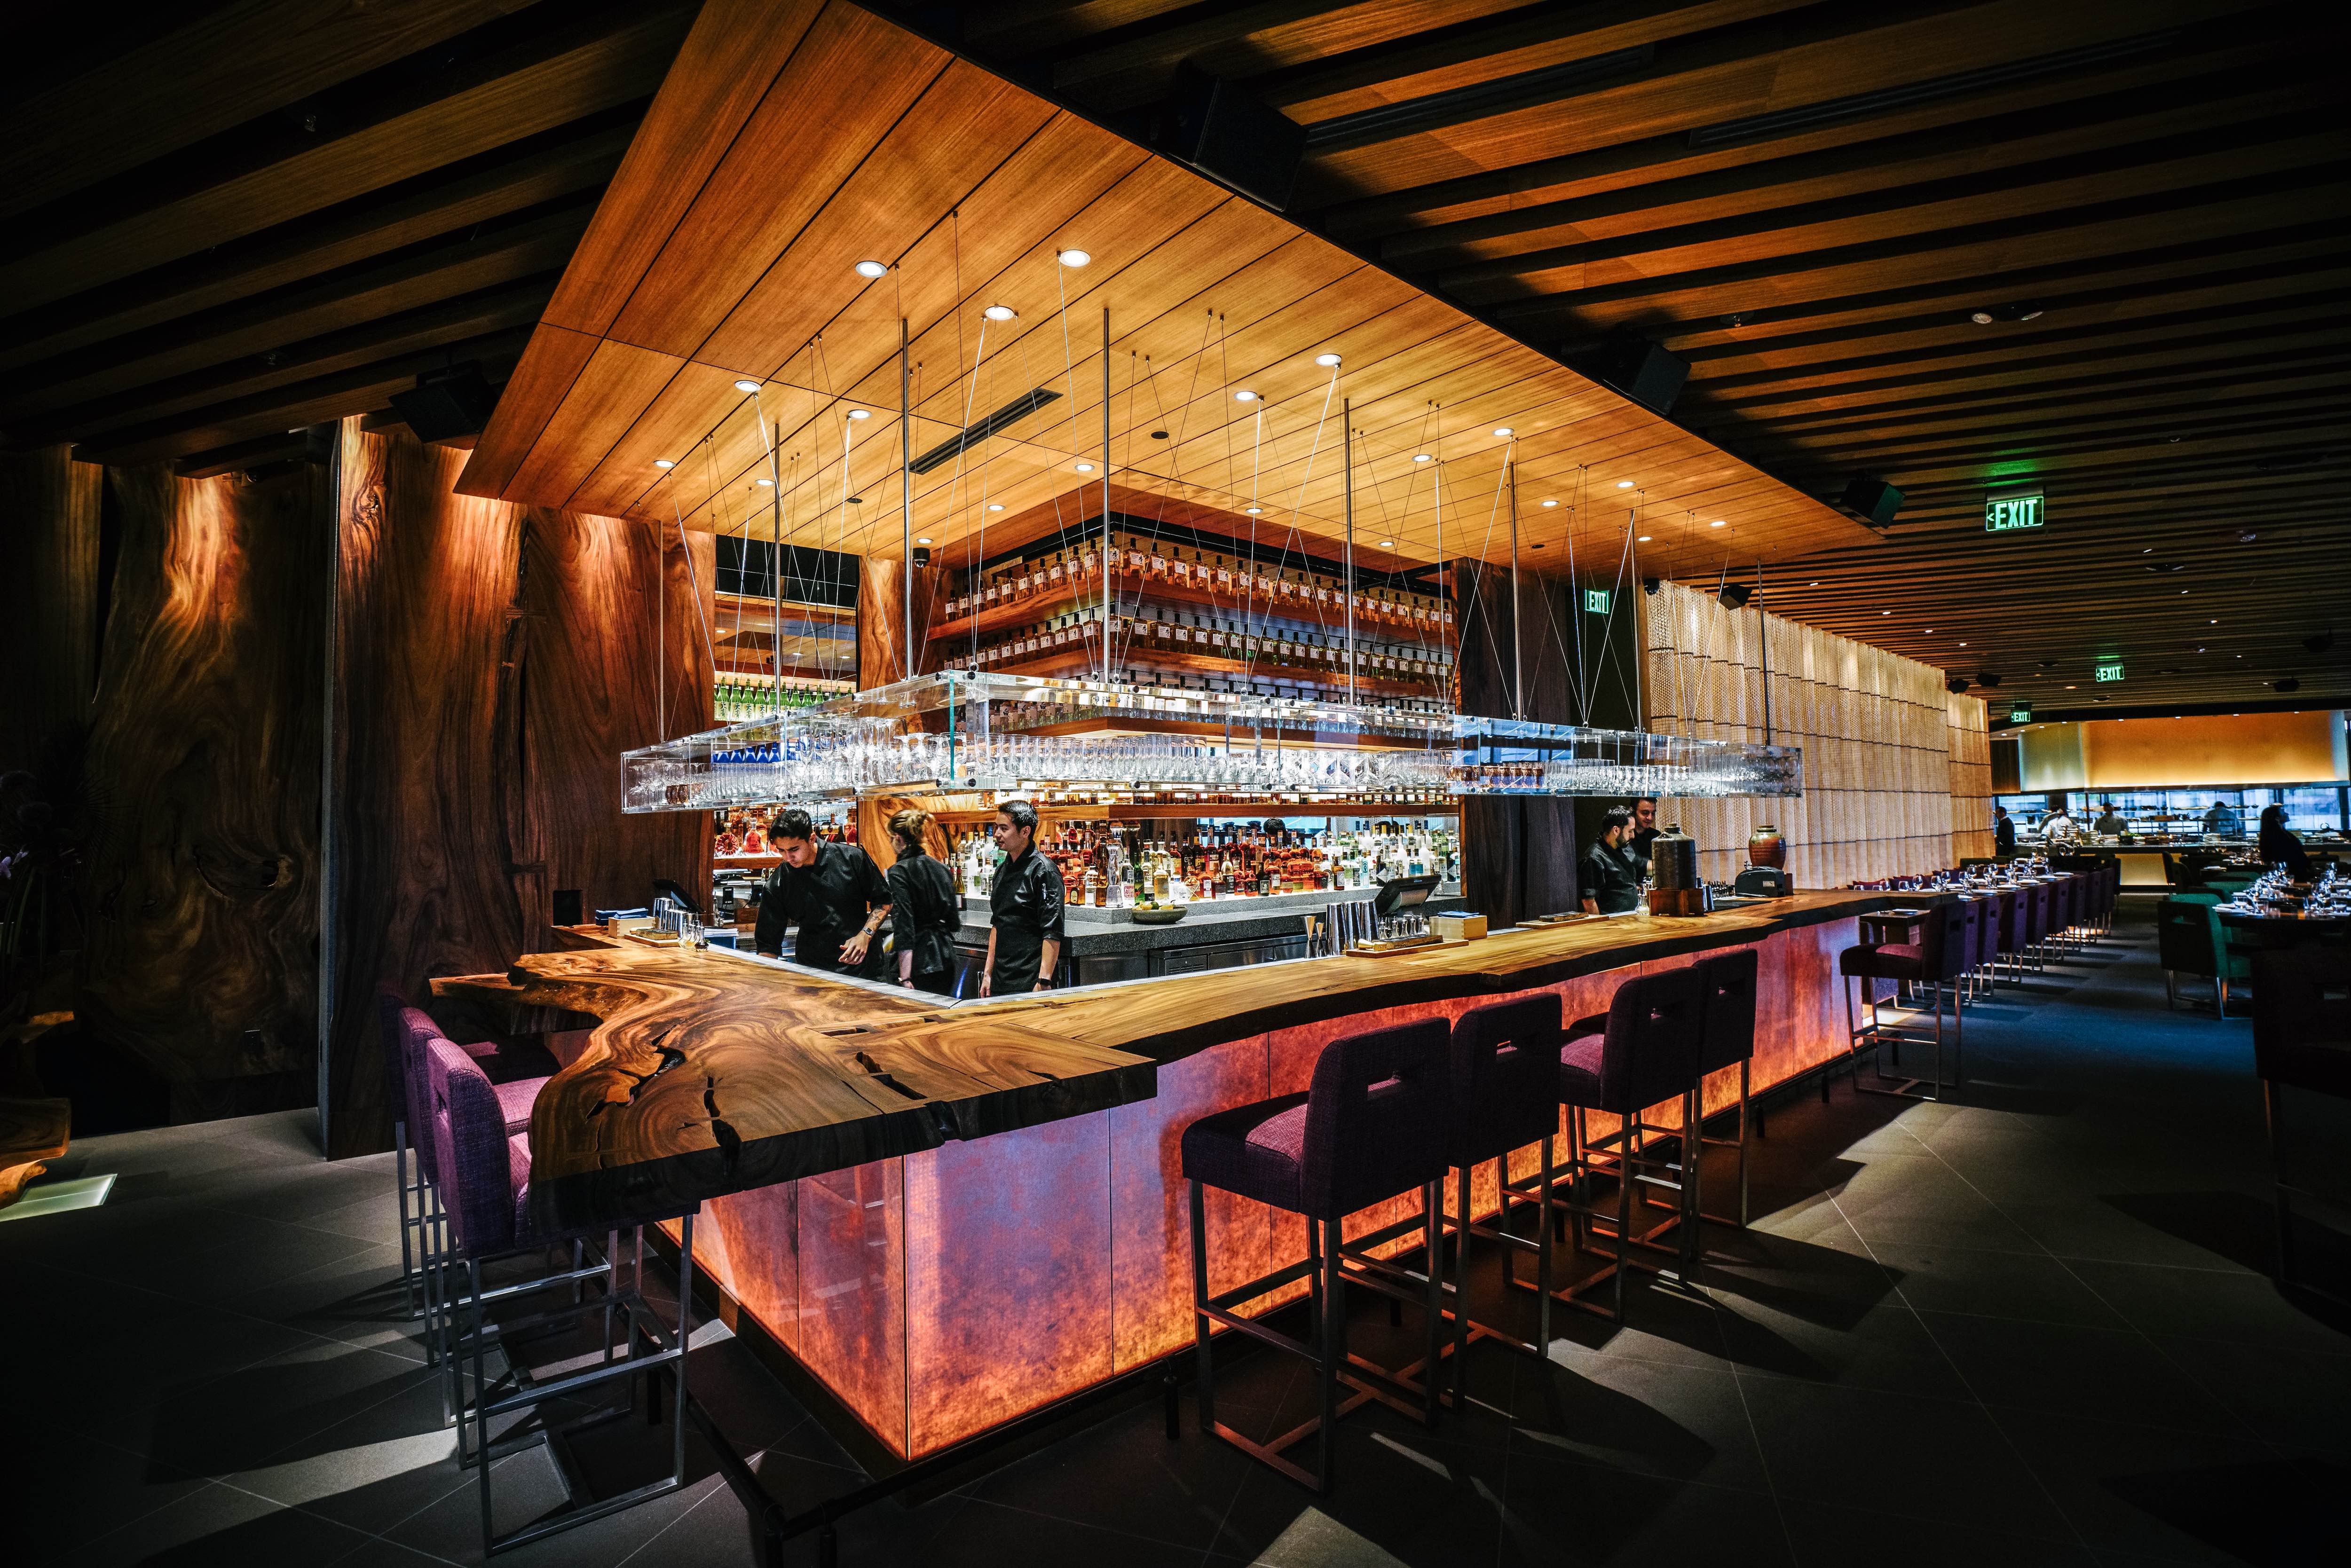 Zuma Boston Offers an Exceptional Dining Experience